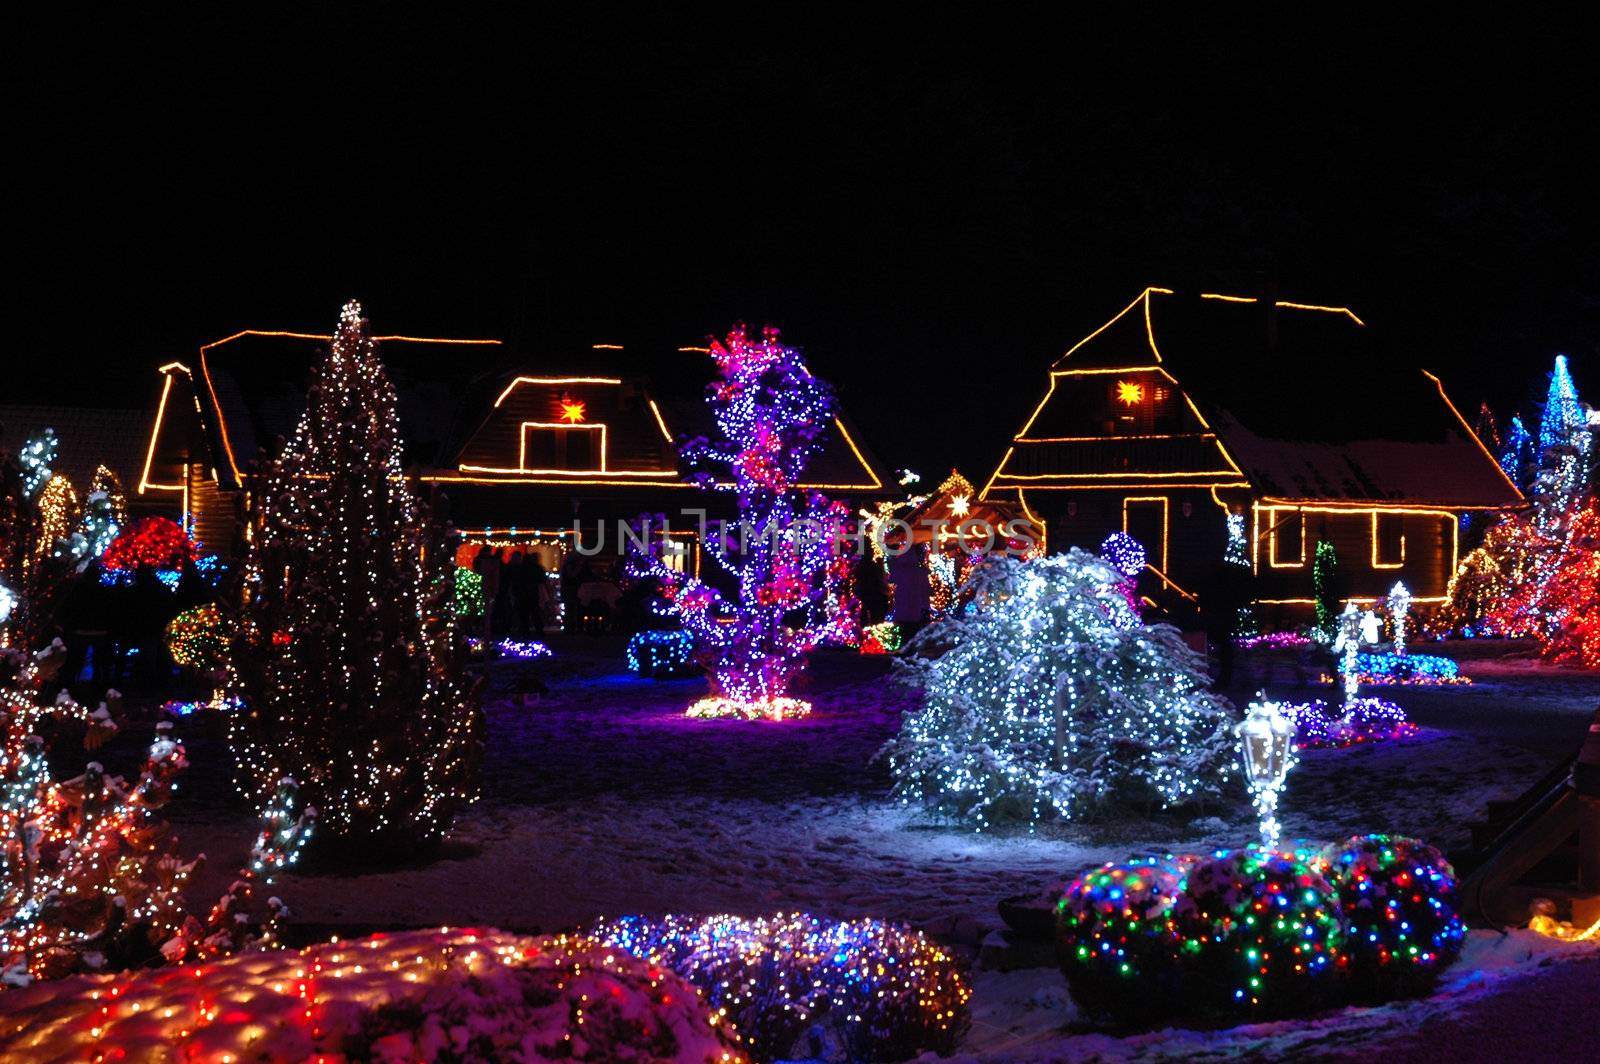 Houses and trees decorated with colorful lights for Christmas